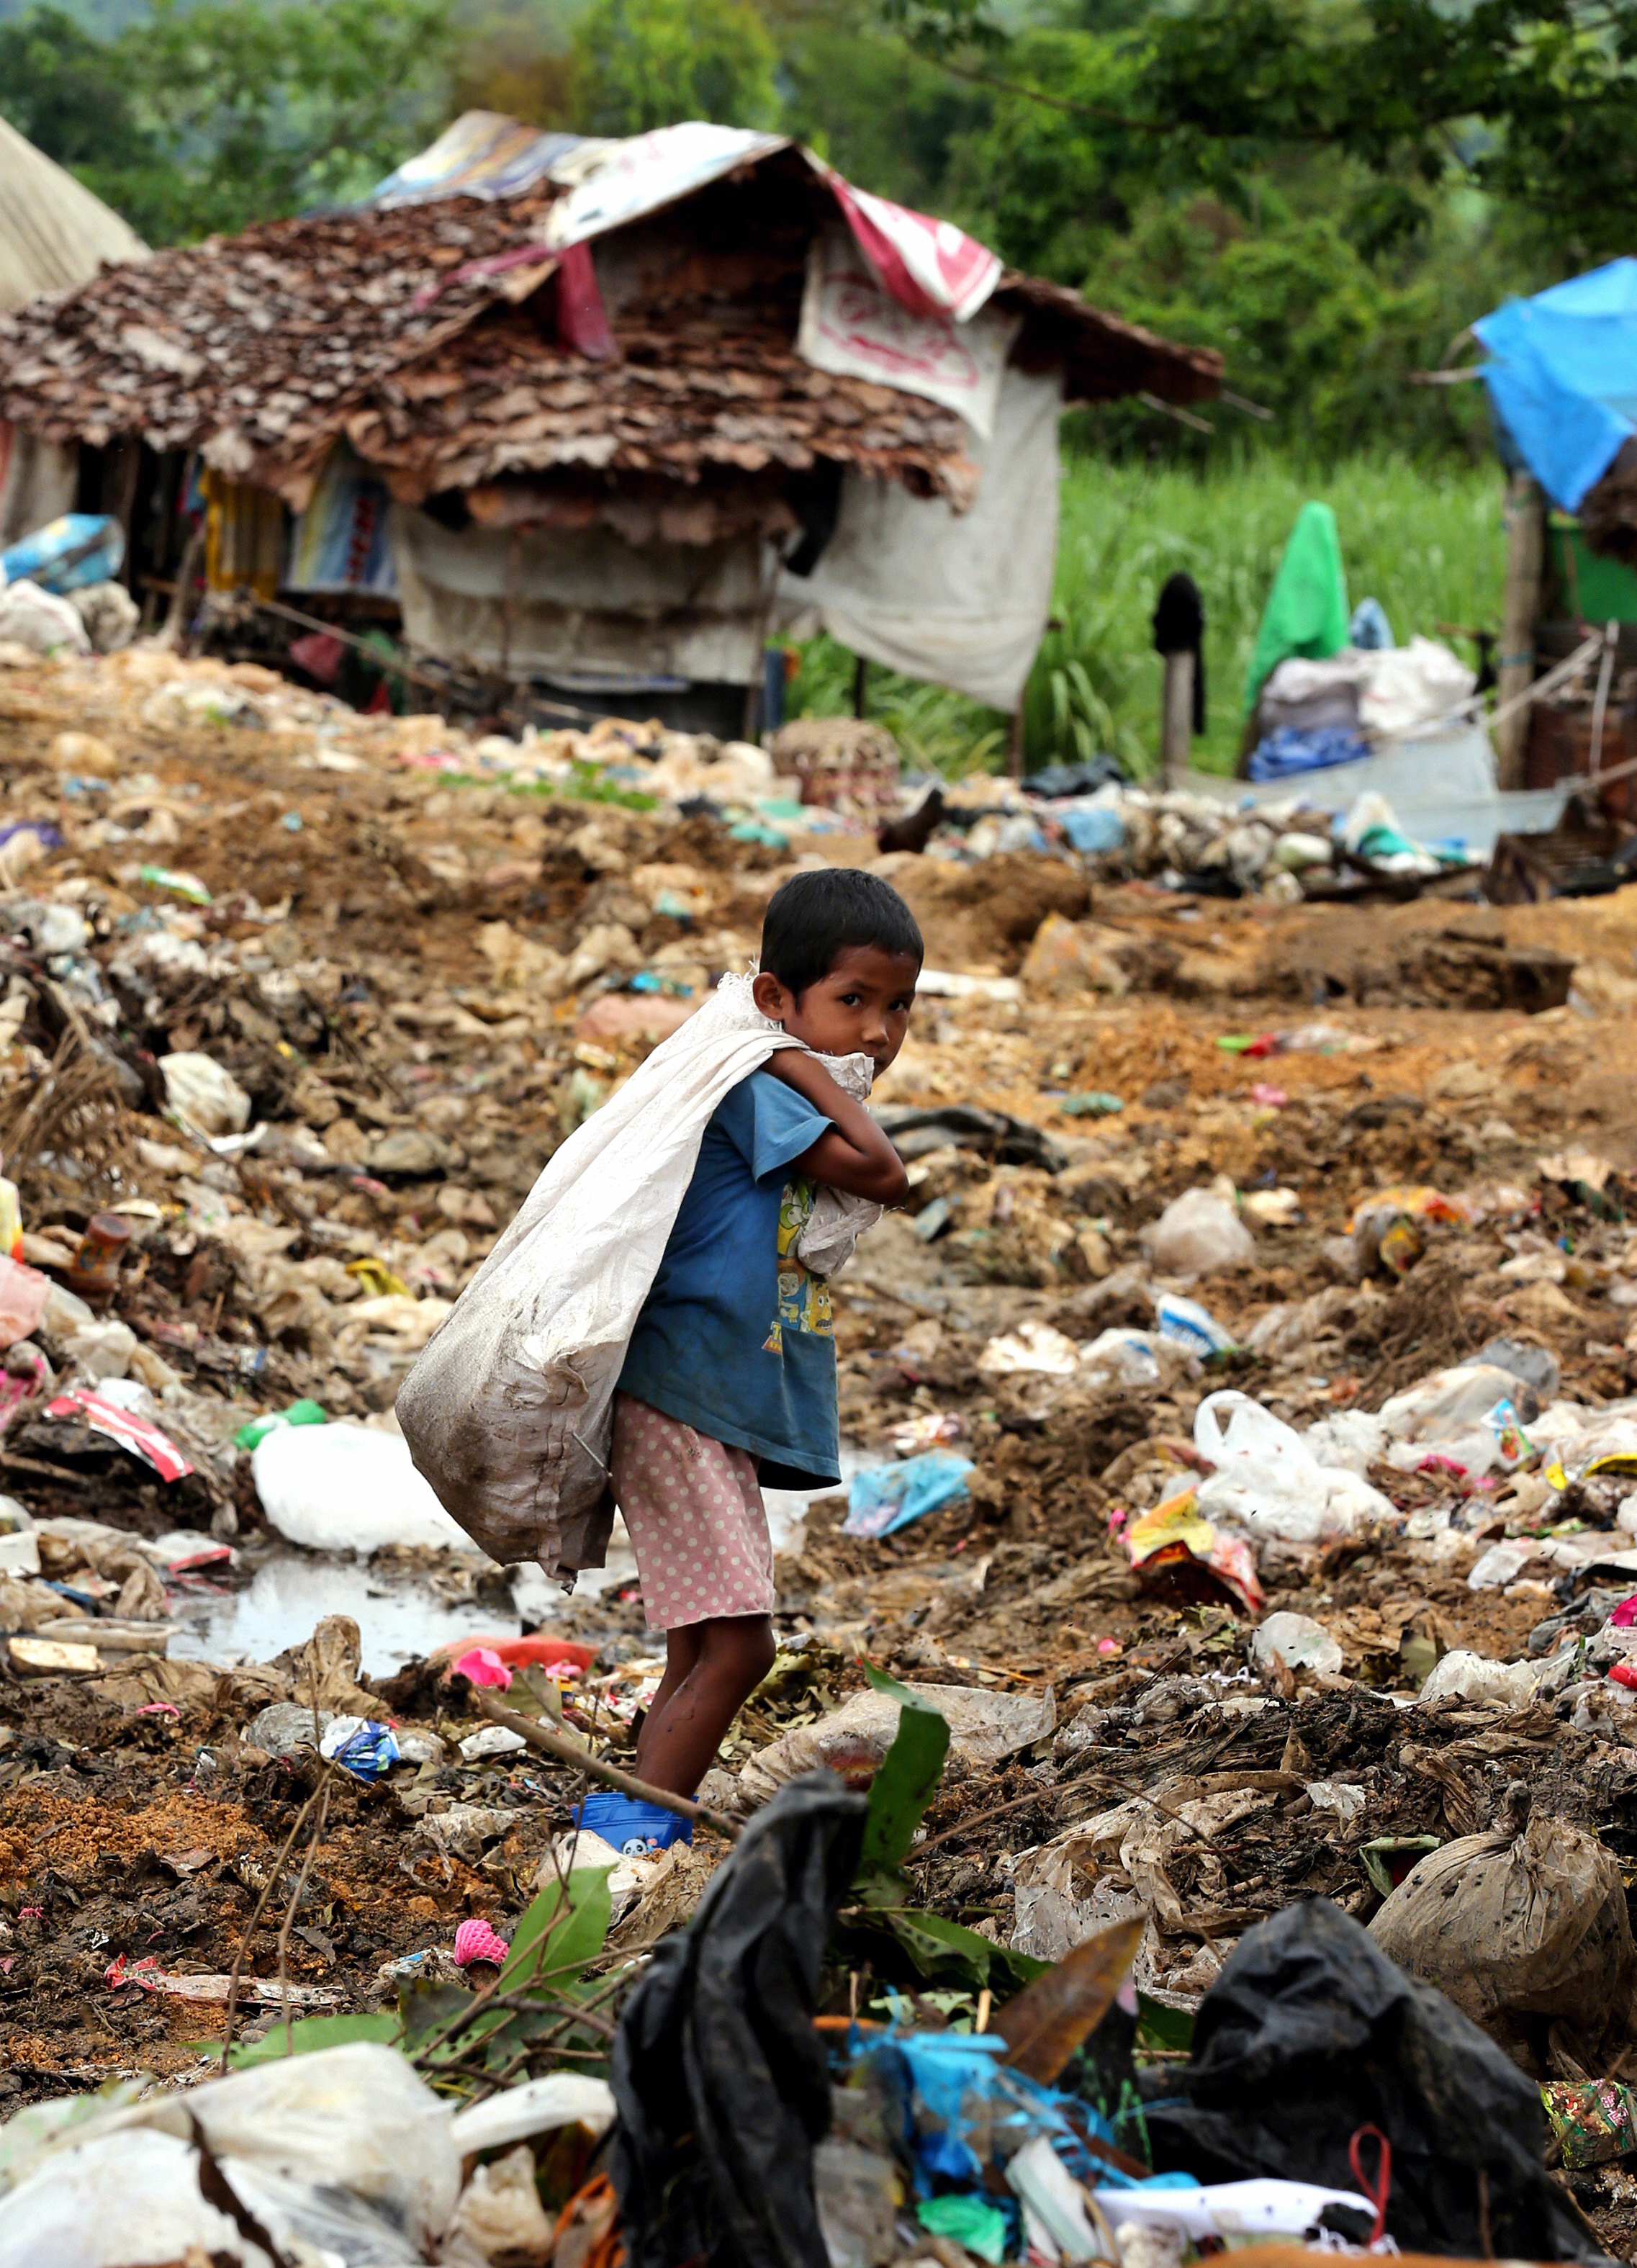 Illegal Myanmar Immigrants Make Living In Rubbish Field in Thailand